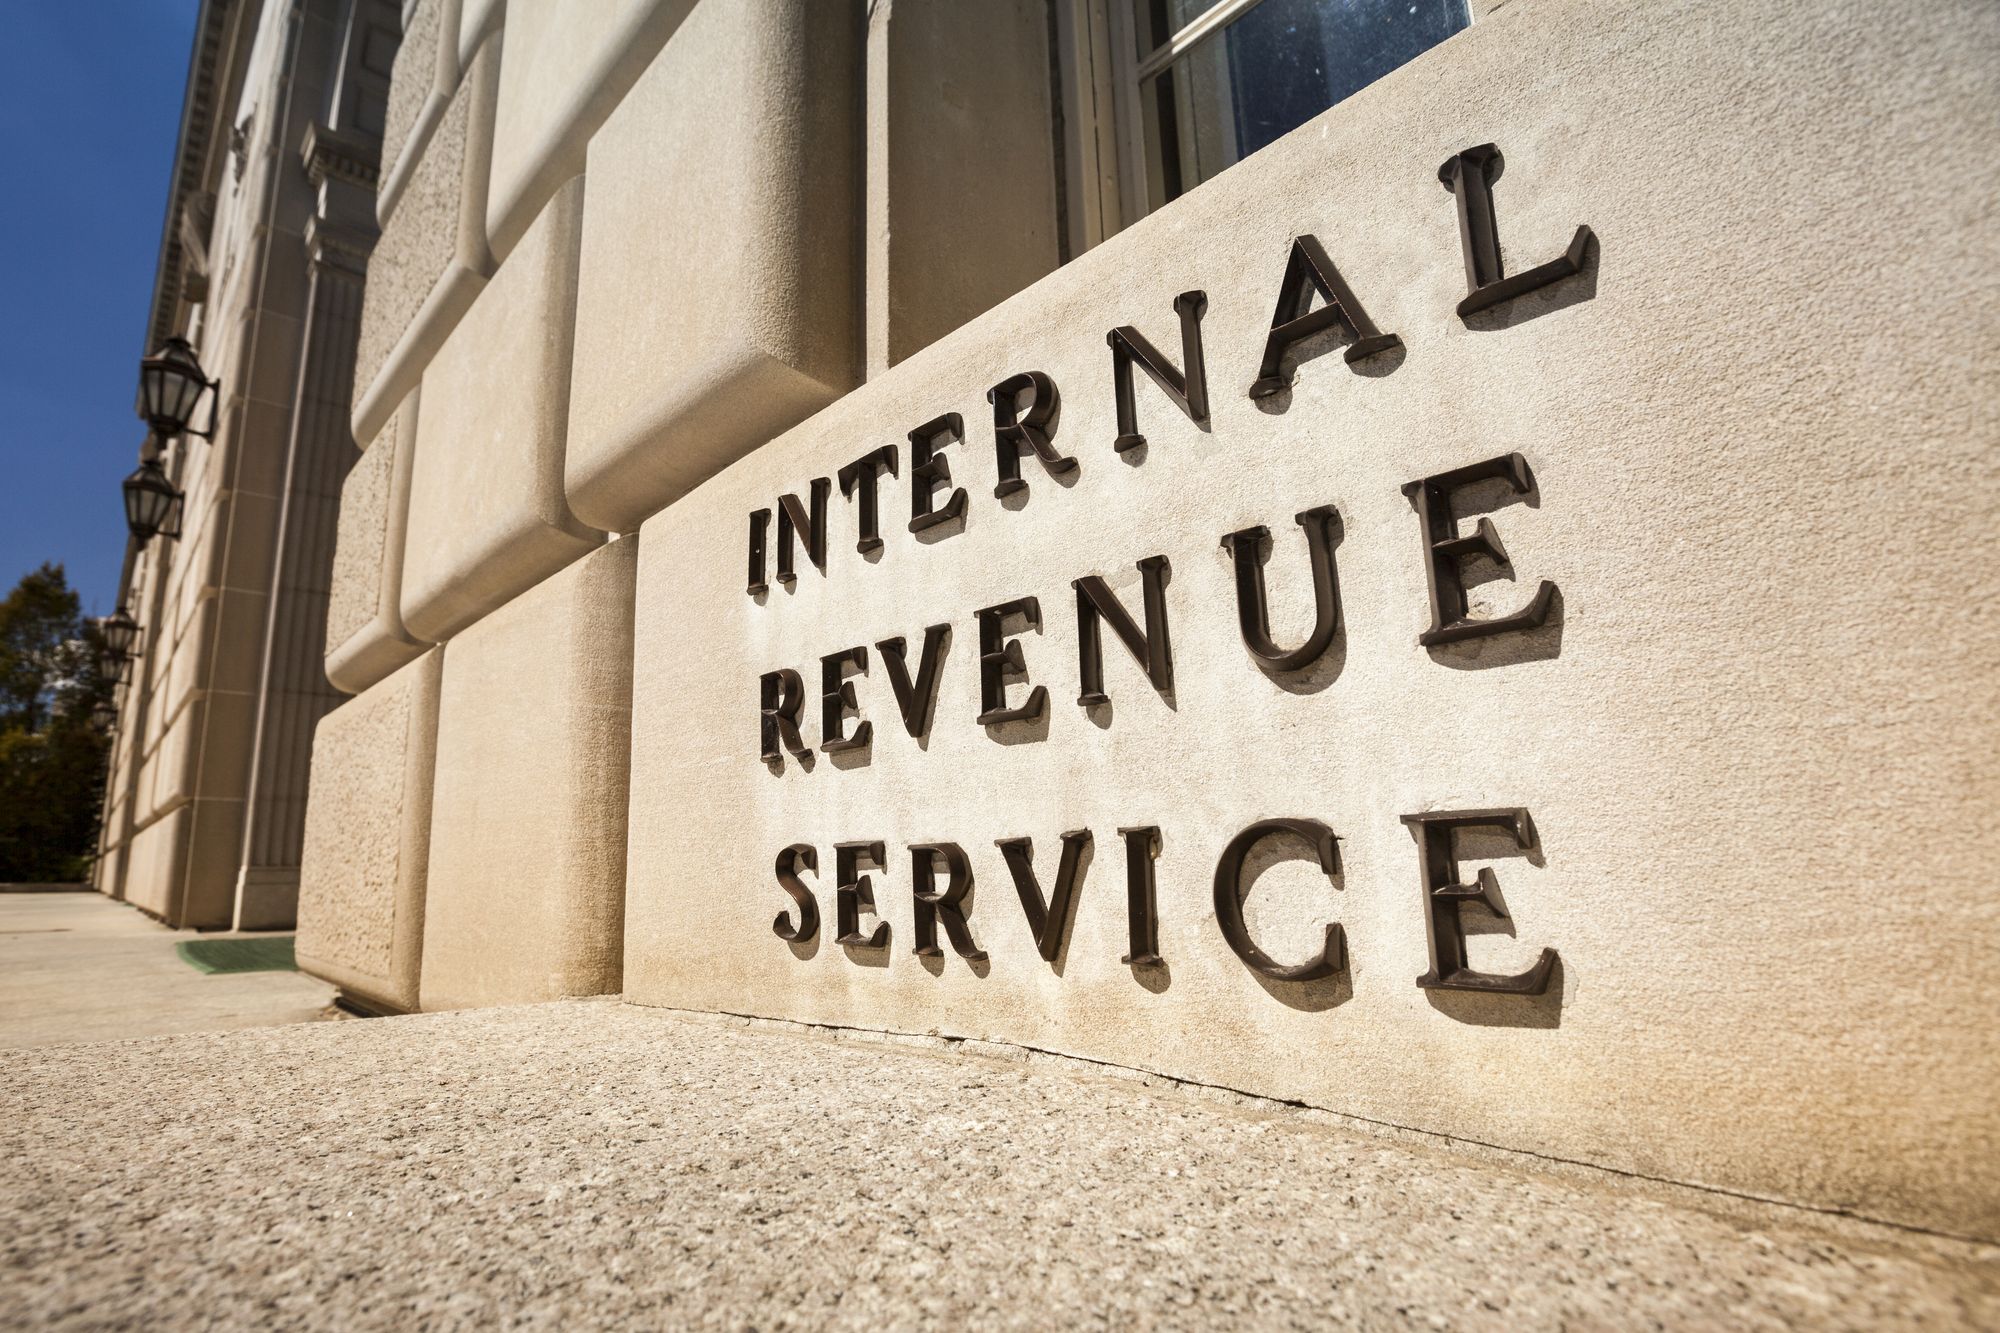 The IRS Hates Telling Entrepreneurs Anything About Taxes. Here's How You Can Find Out What They're Thinking.